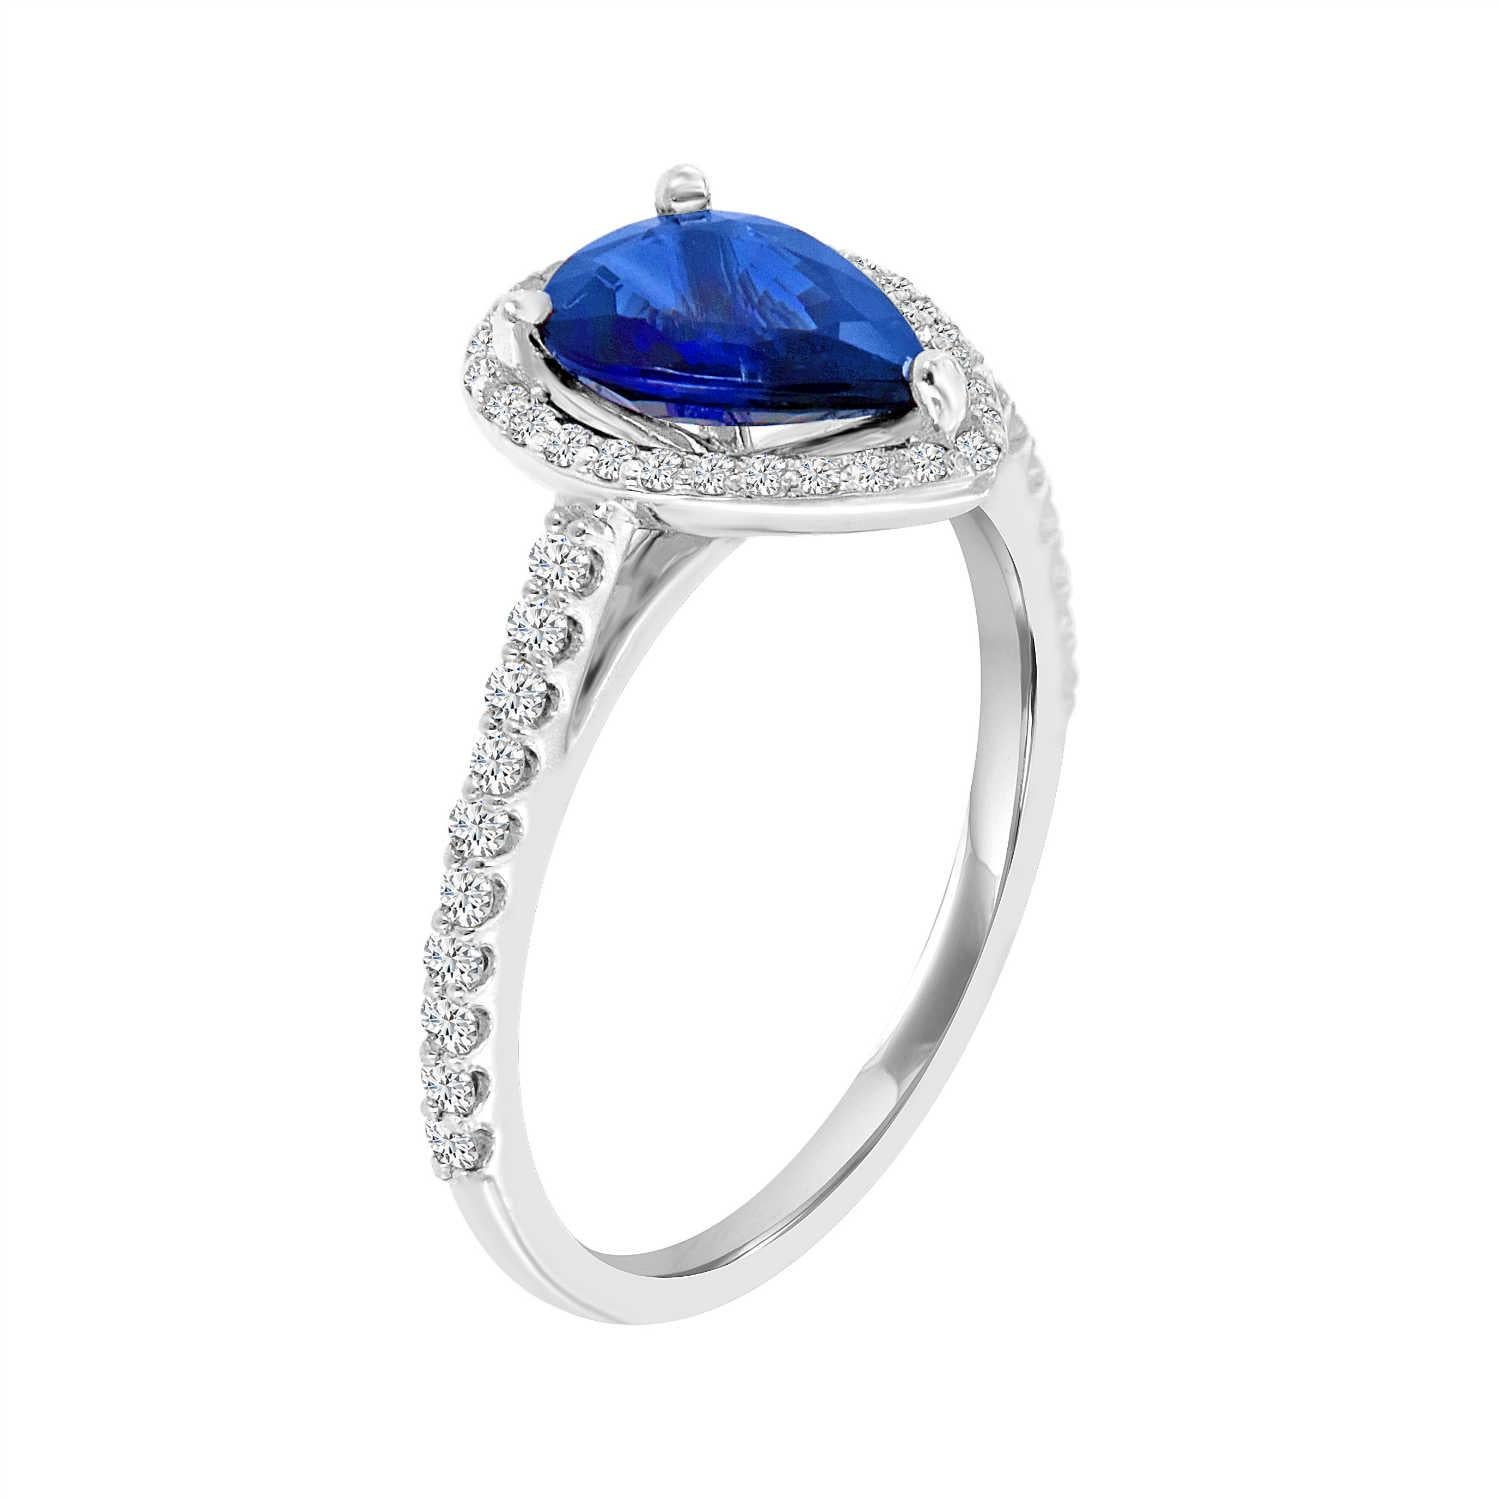 This delicate ring features a 1.55-carat Pear shape Blue Sapphire encircled by a halo of round melee diamonds. A scalloped micro-prong diamonds on the shank adds a dazzling effect. Experience the difference in person!

Product details: 

Center